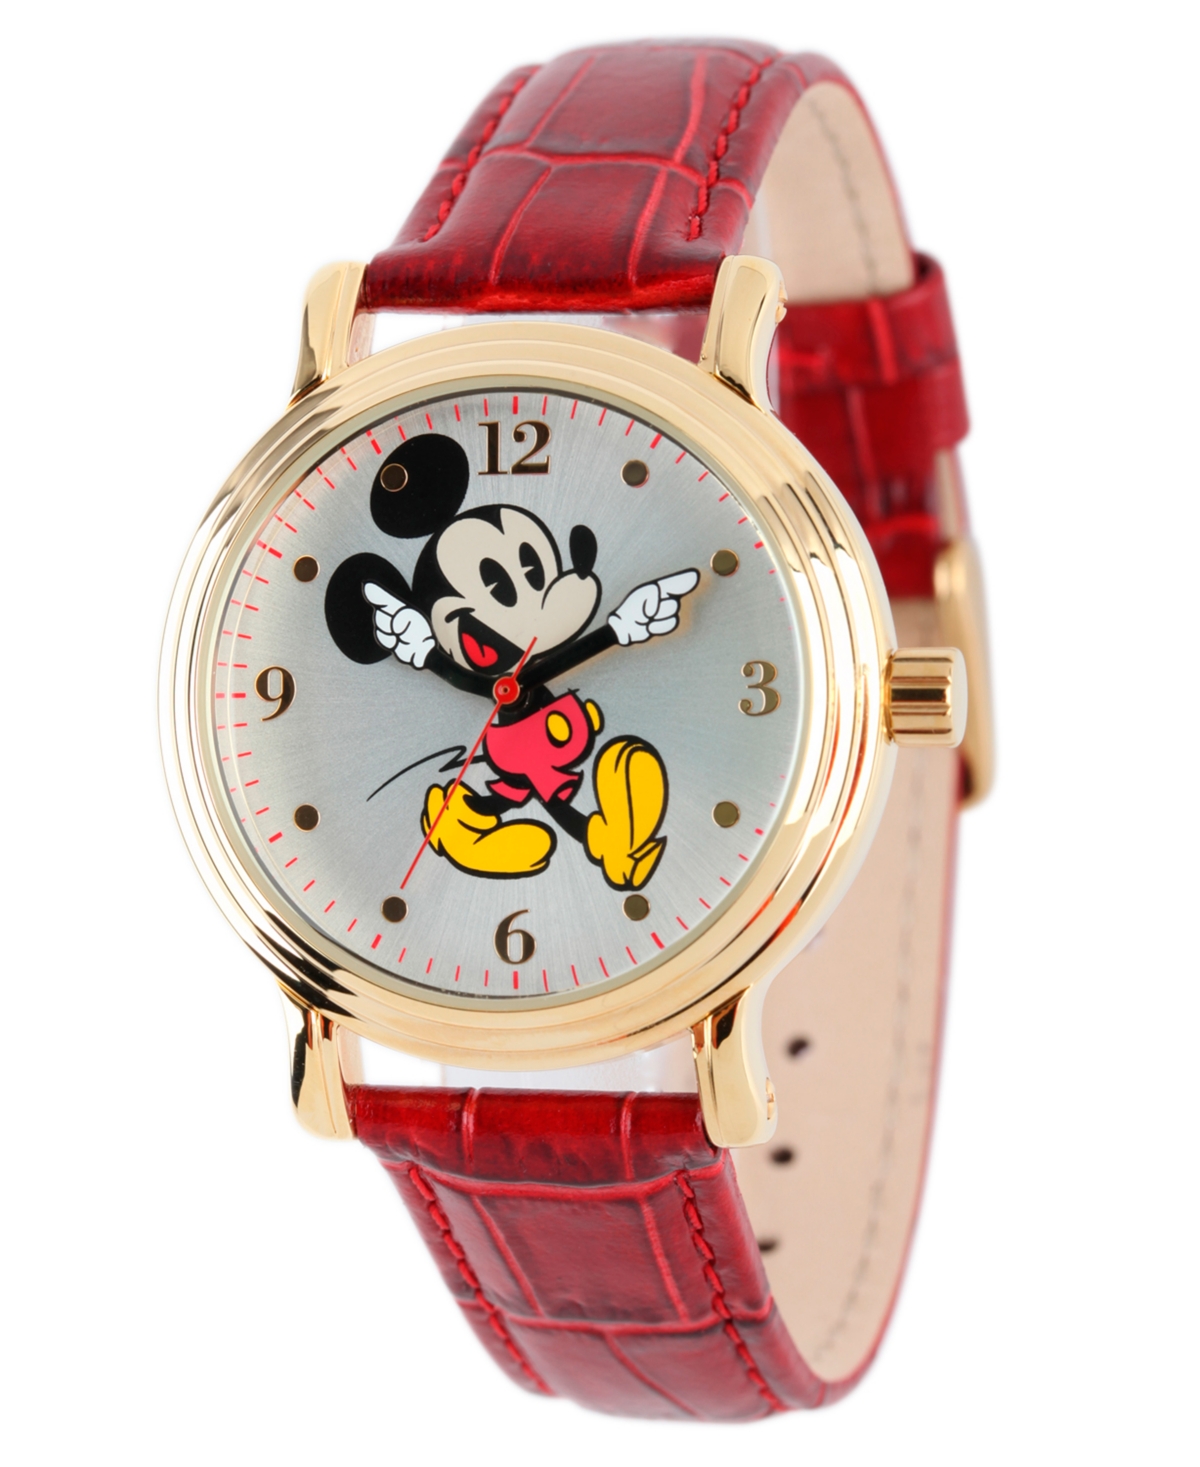 Disney Mickey Mouse Men's Shiny Gold Vintage Alloy Watch - Red